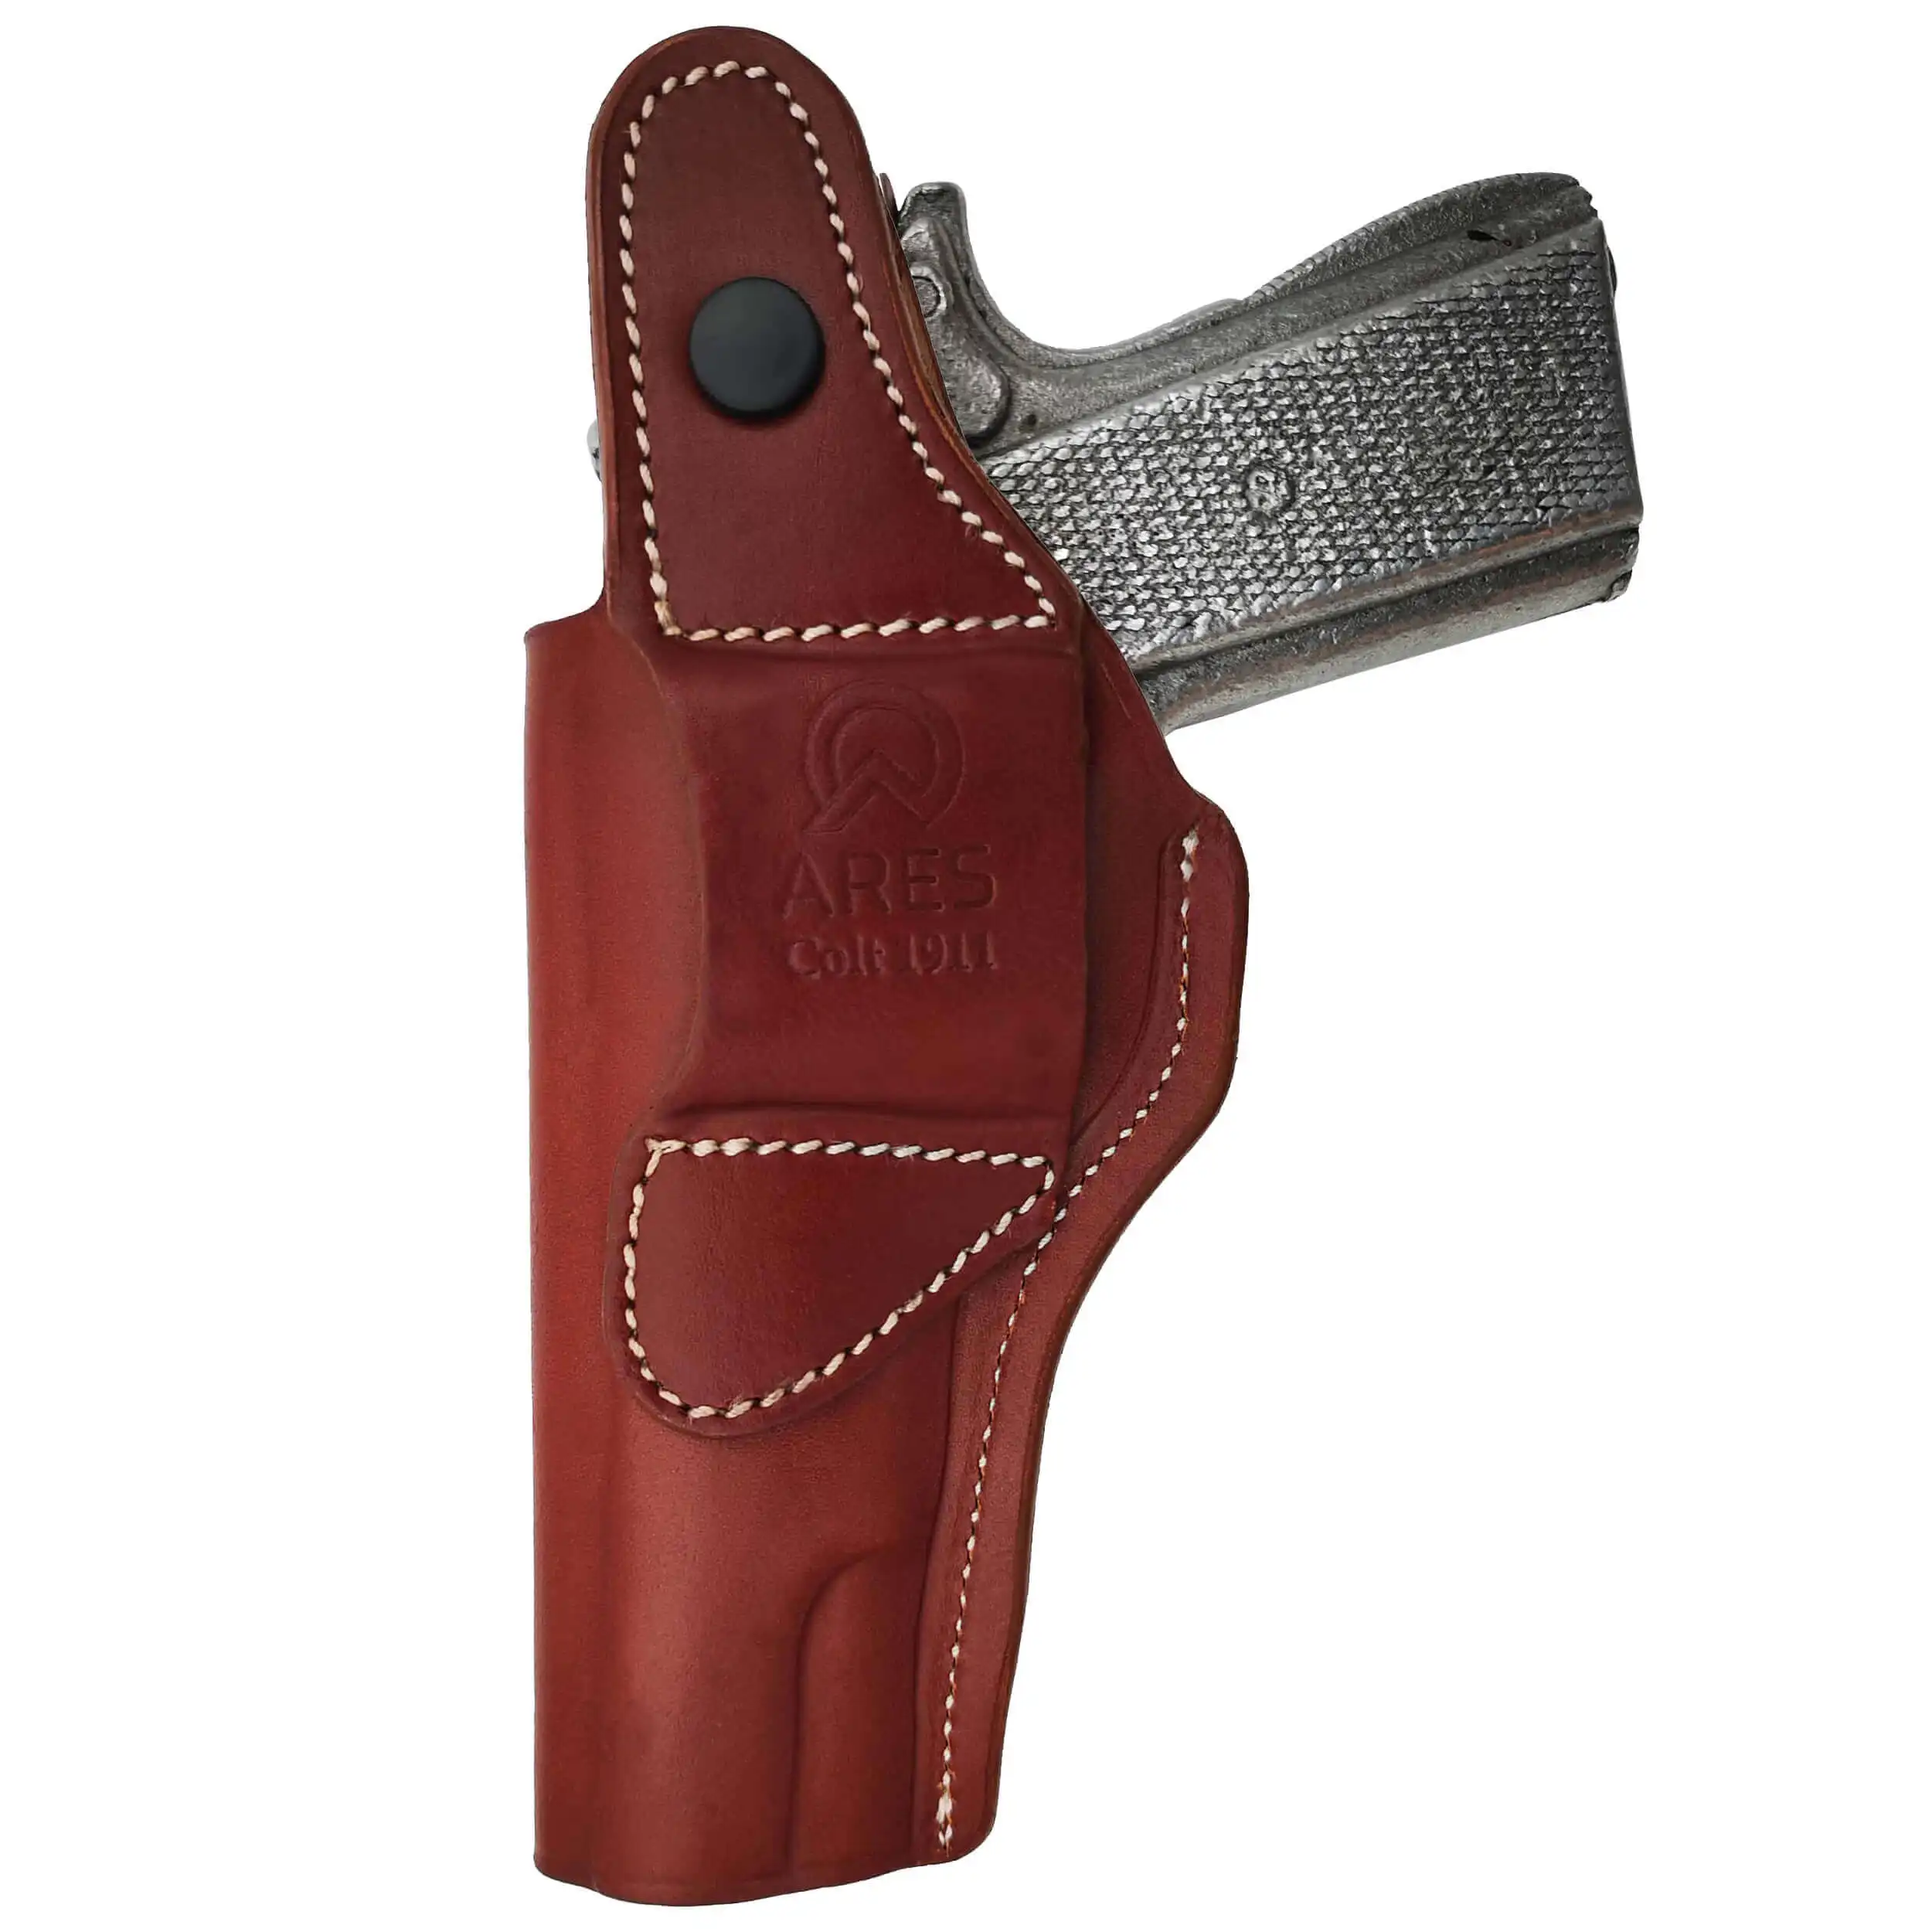 

Beretta 81F Compatible Real Leather Holster With Carrying Clip Concealed Carry Thumb Release IWB/OWB Strap Gun Pouch Brown